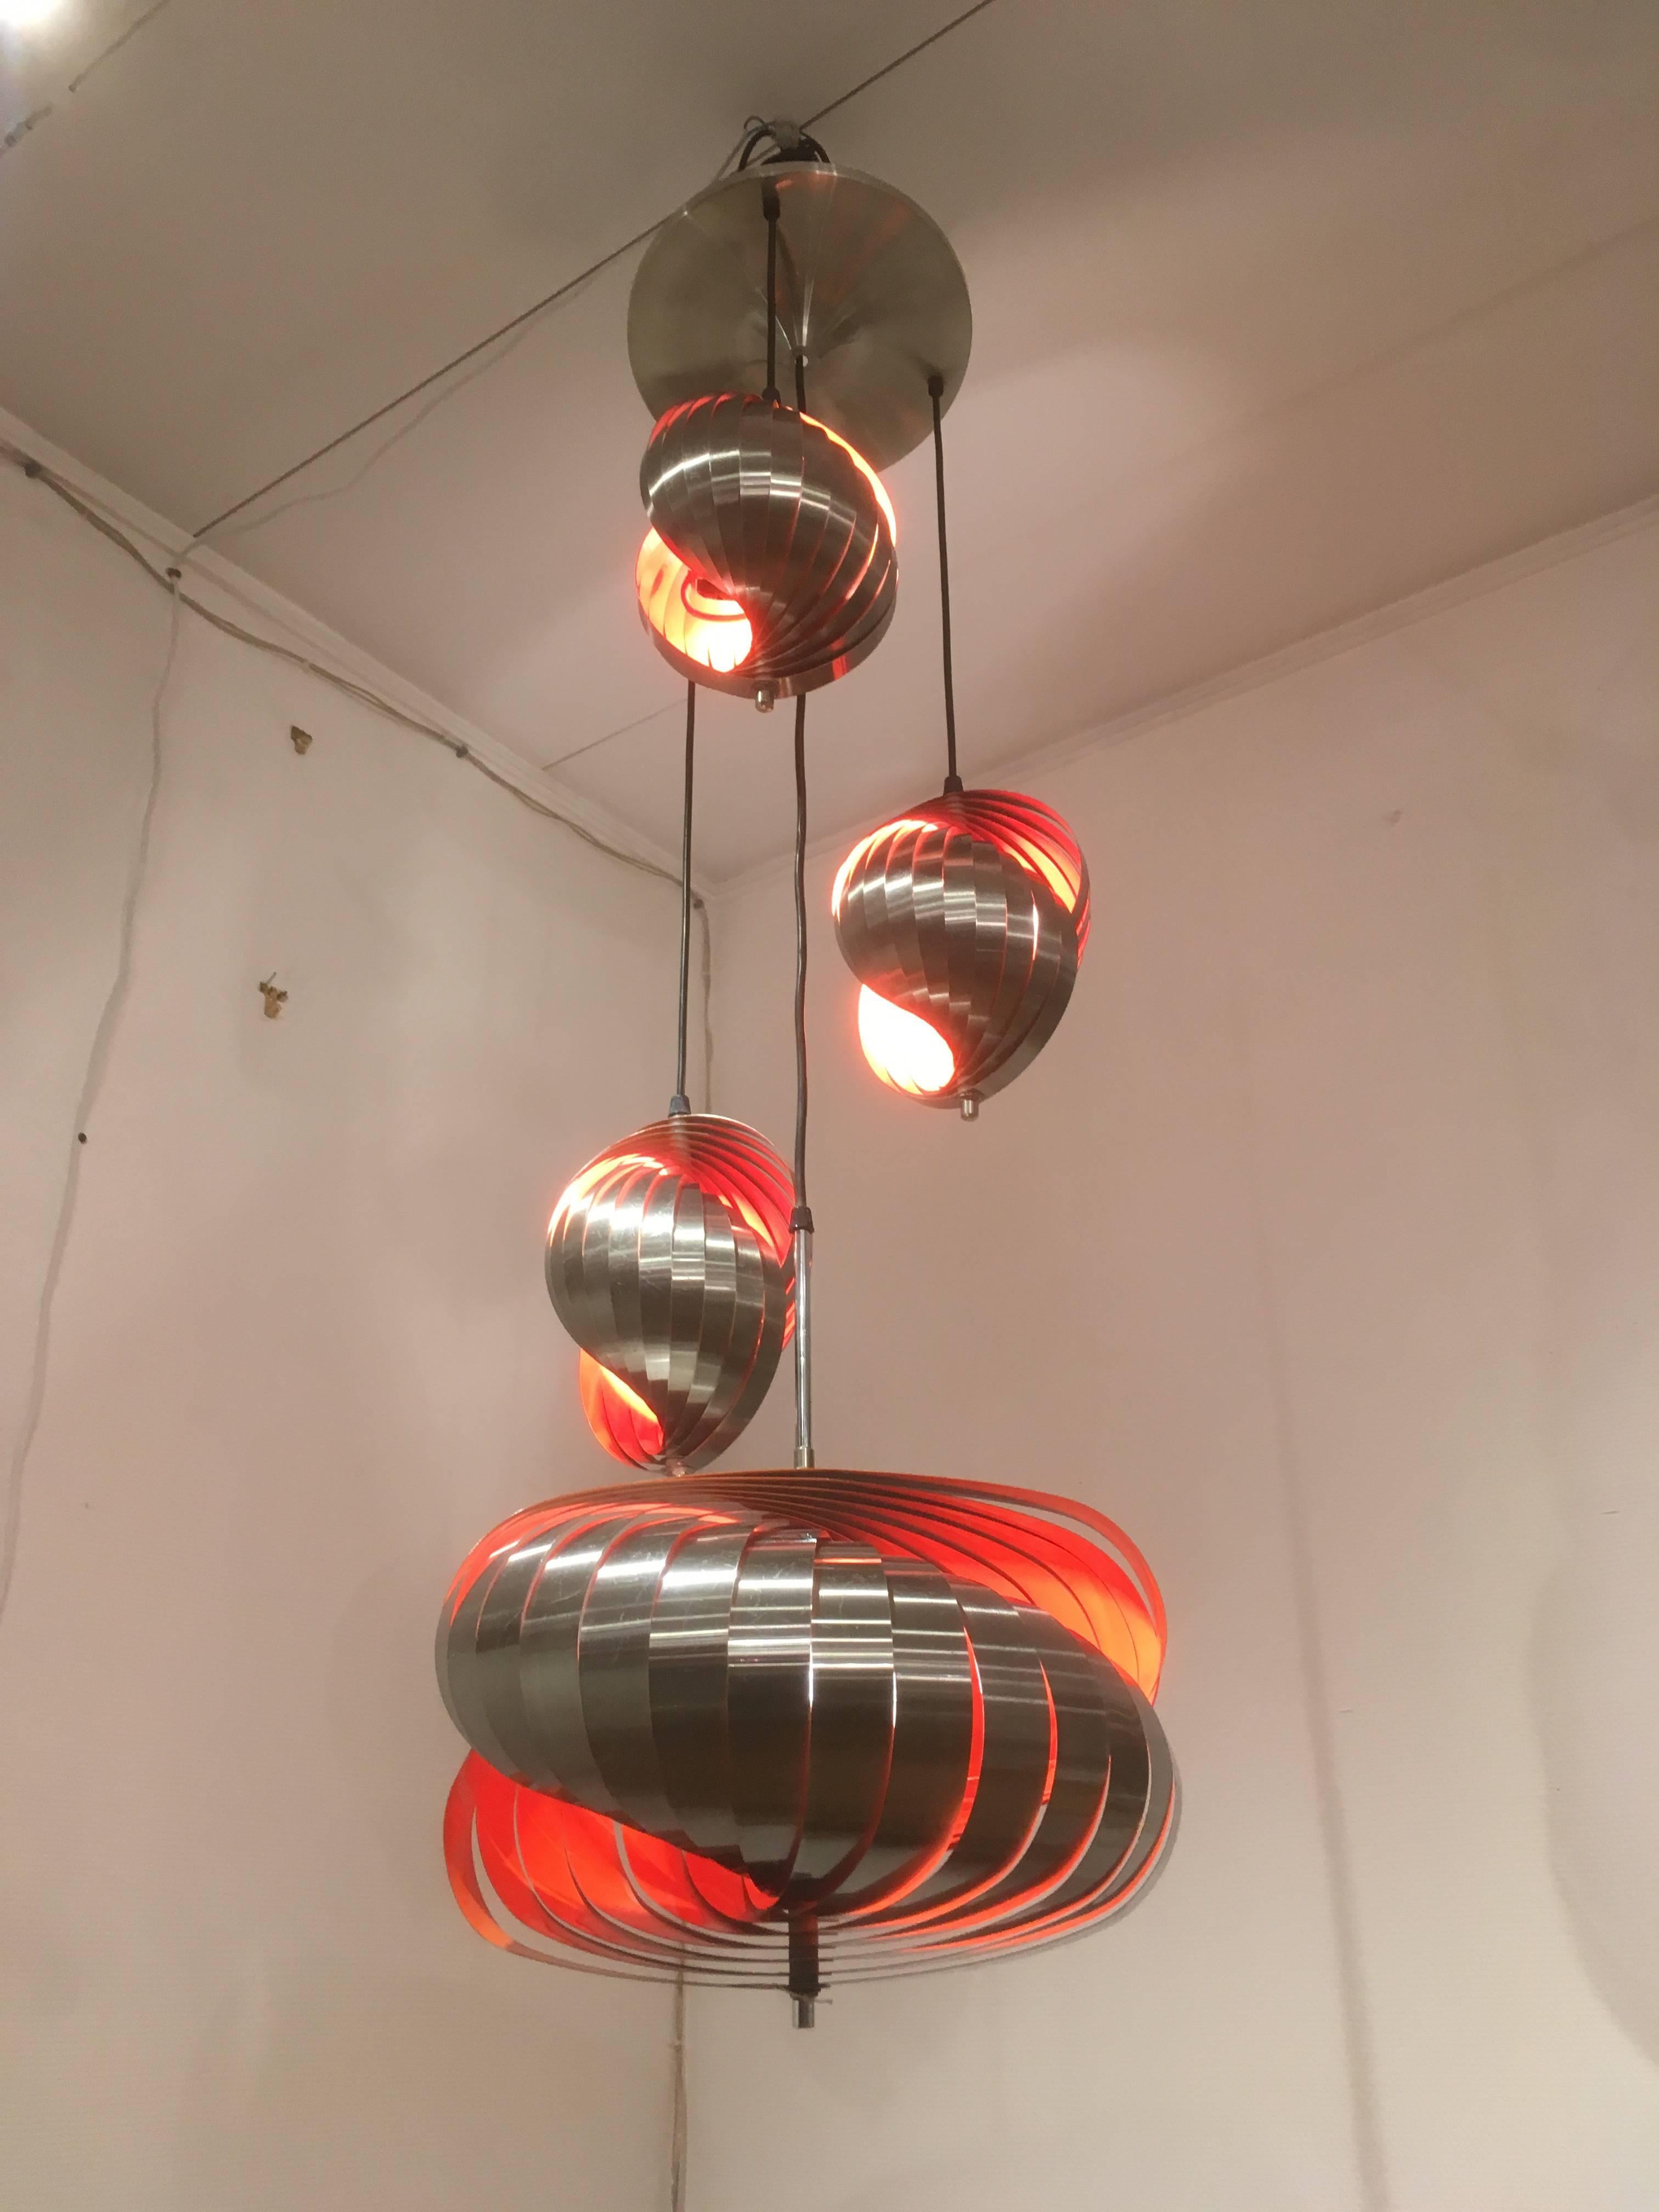 Aluminium light designed by Henri Mathieu in the 1970s.
Each pendant is made of bands of brushed metal, lacquered in orange inside radiating warm light.
The pendants could be hung at different heights.